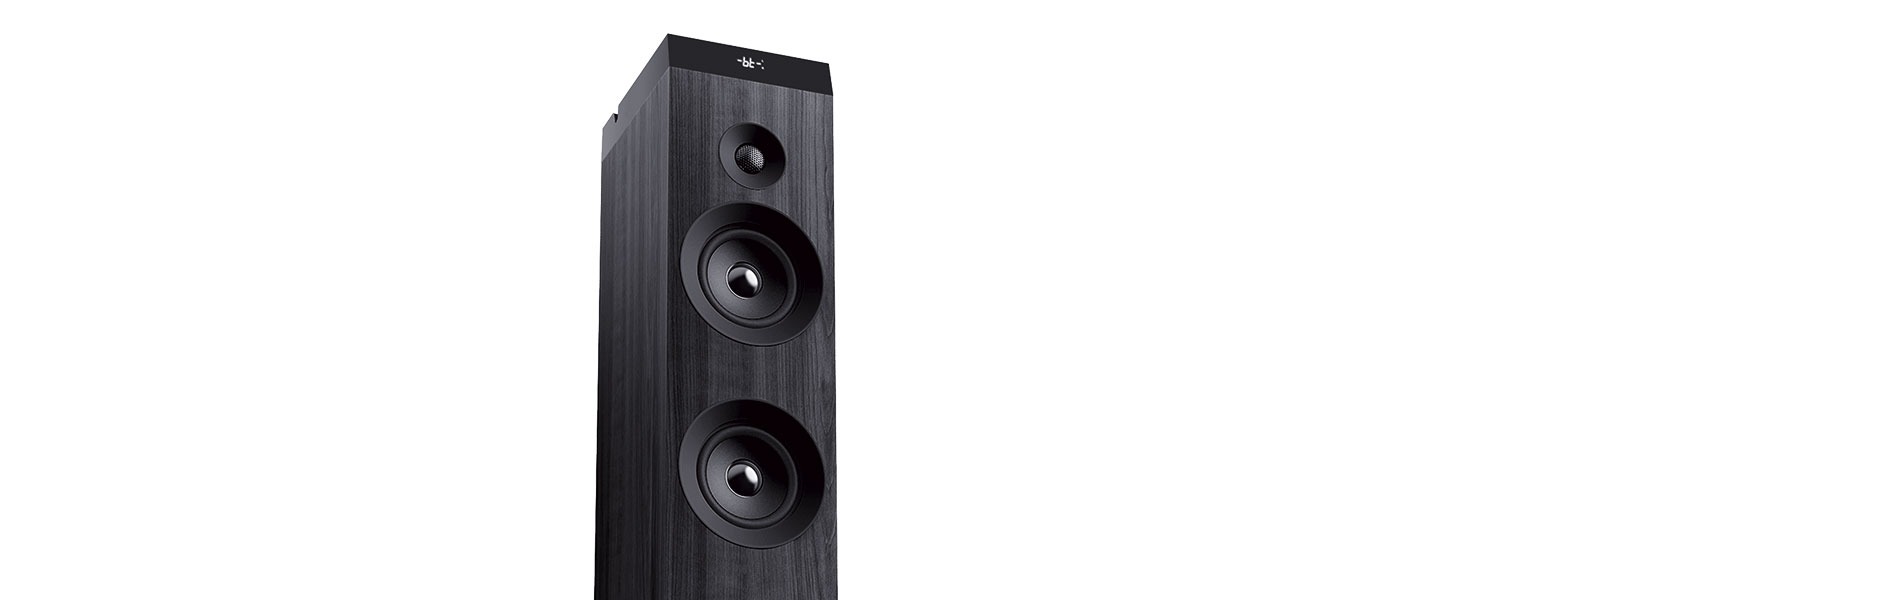 100W Hi-Fi sound in your living room